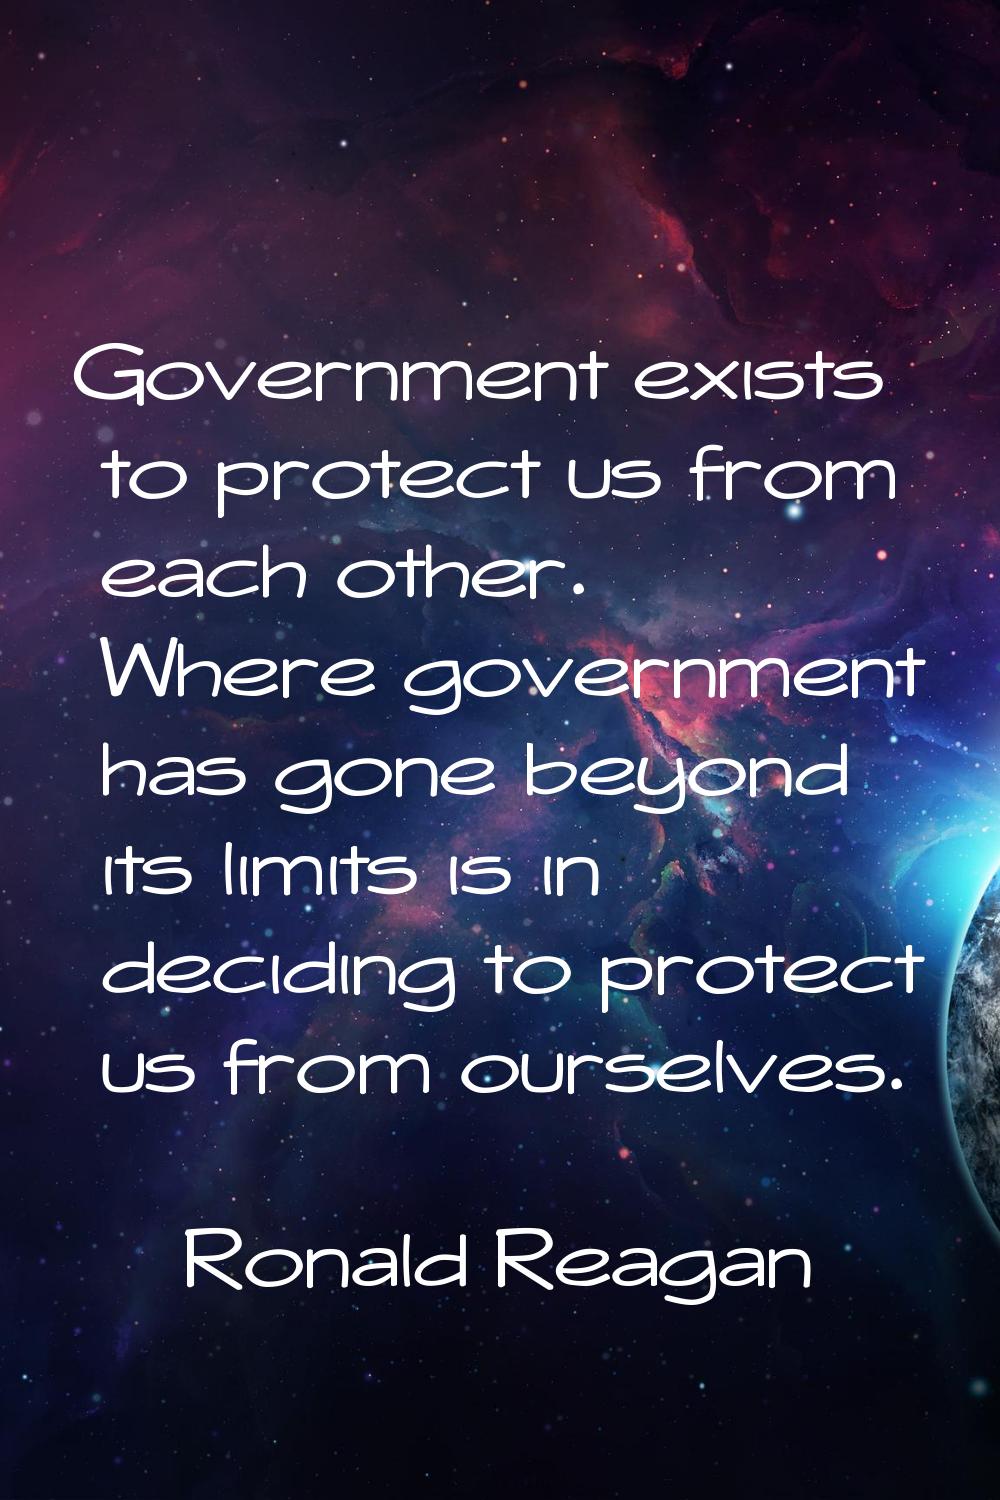 Government exists to protect us from each other. Where government has gone beyond its limits is in 